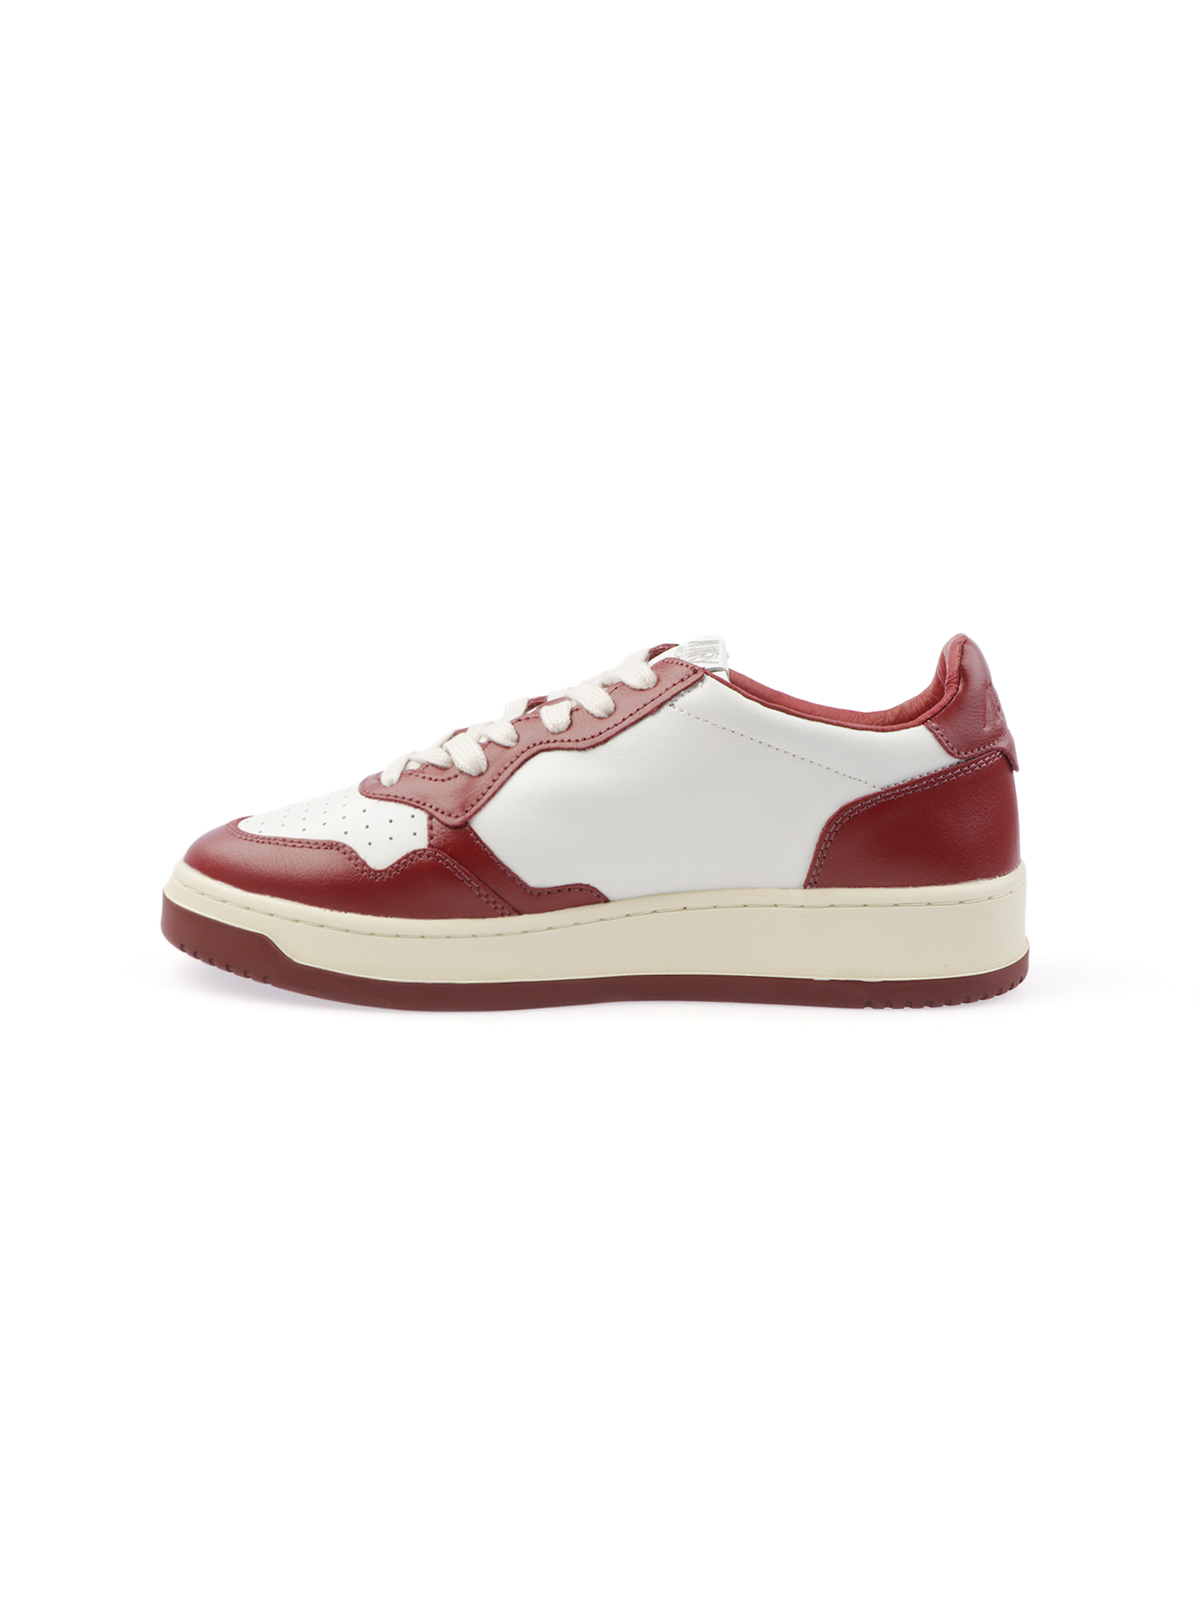 Picture of AUTRY | Men's Medalist Low Biccolor Leather Sneakers